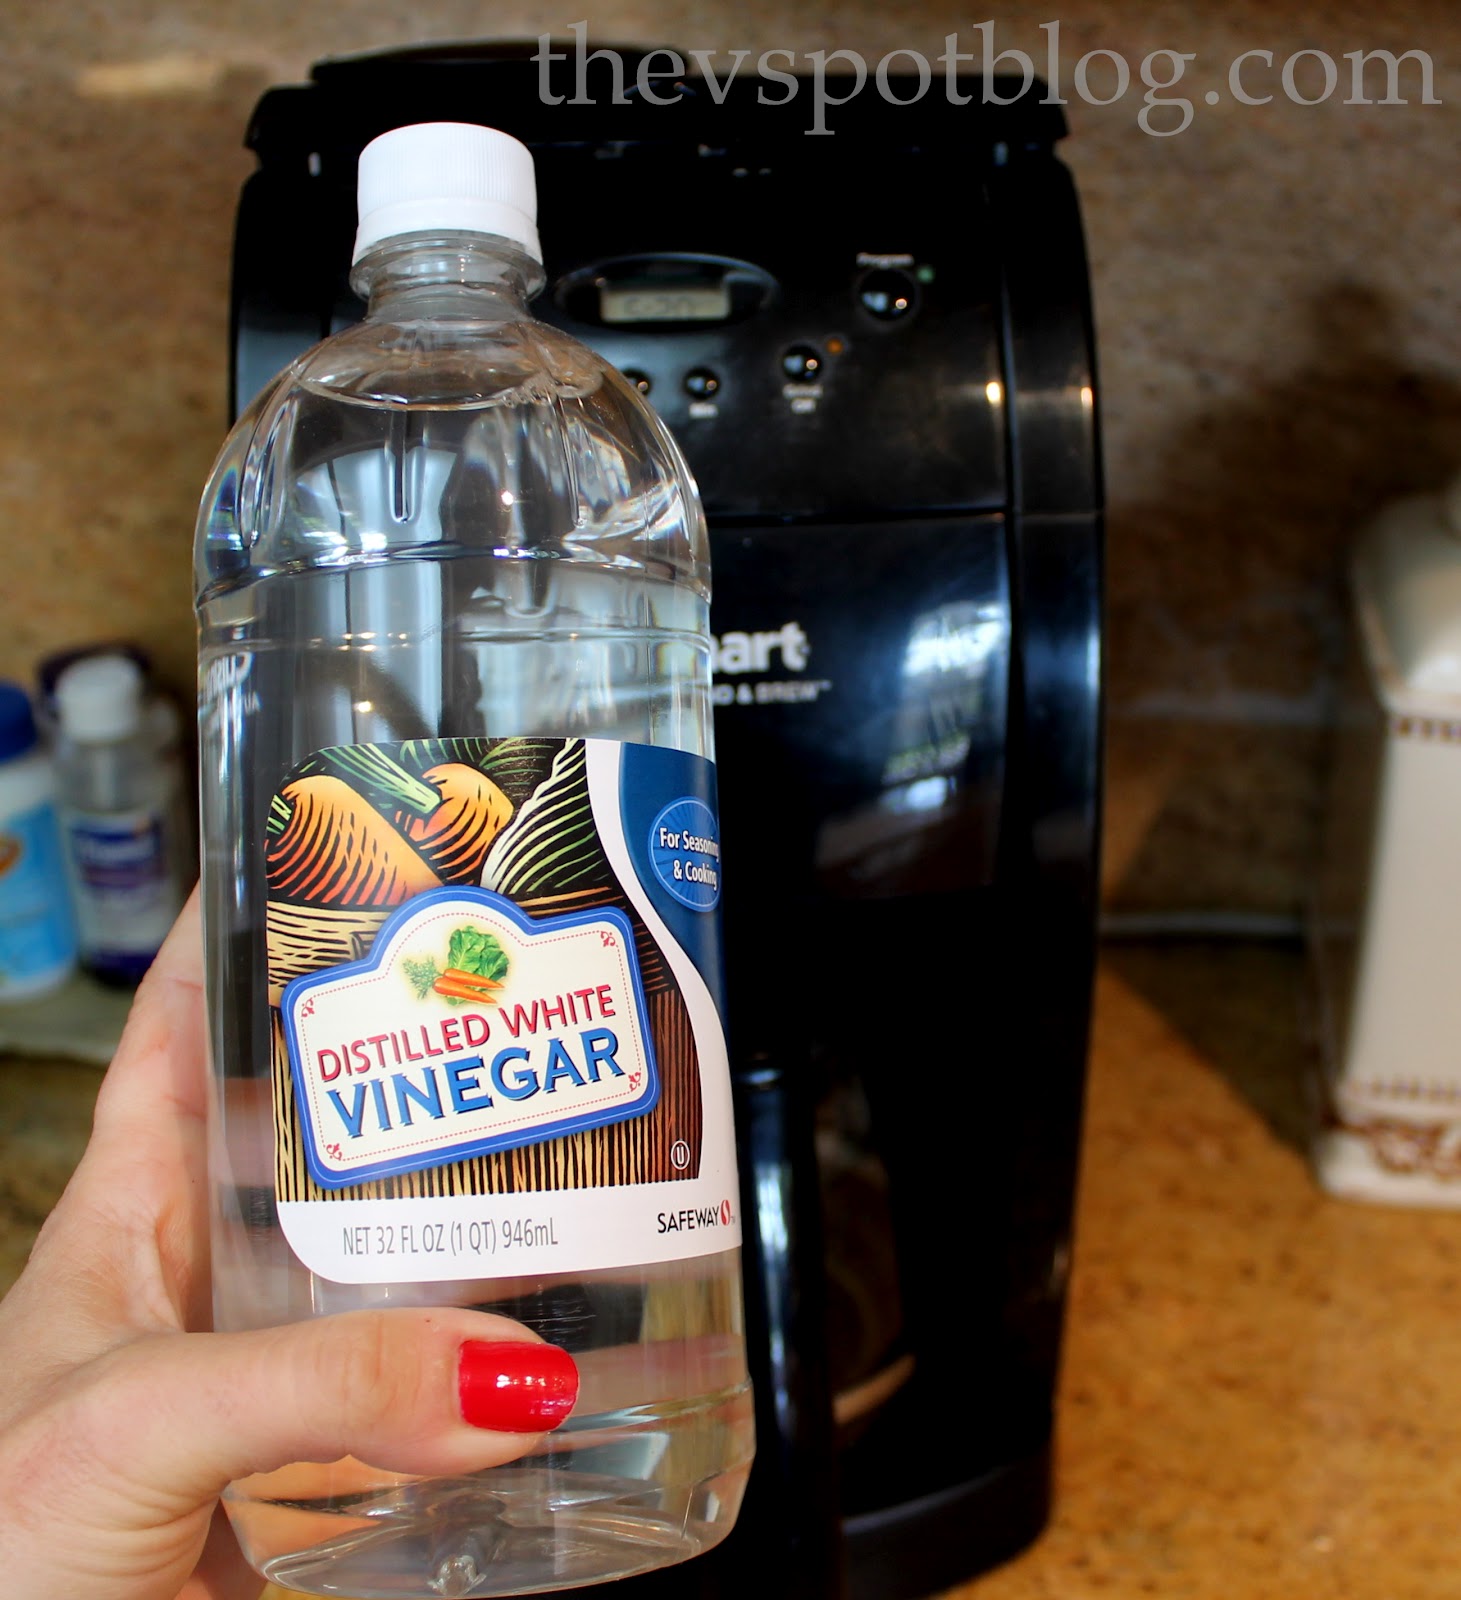 coffee to How coffee vinegar cleaning vinegar maker your  clean maker,